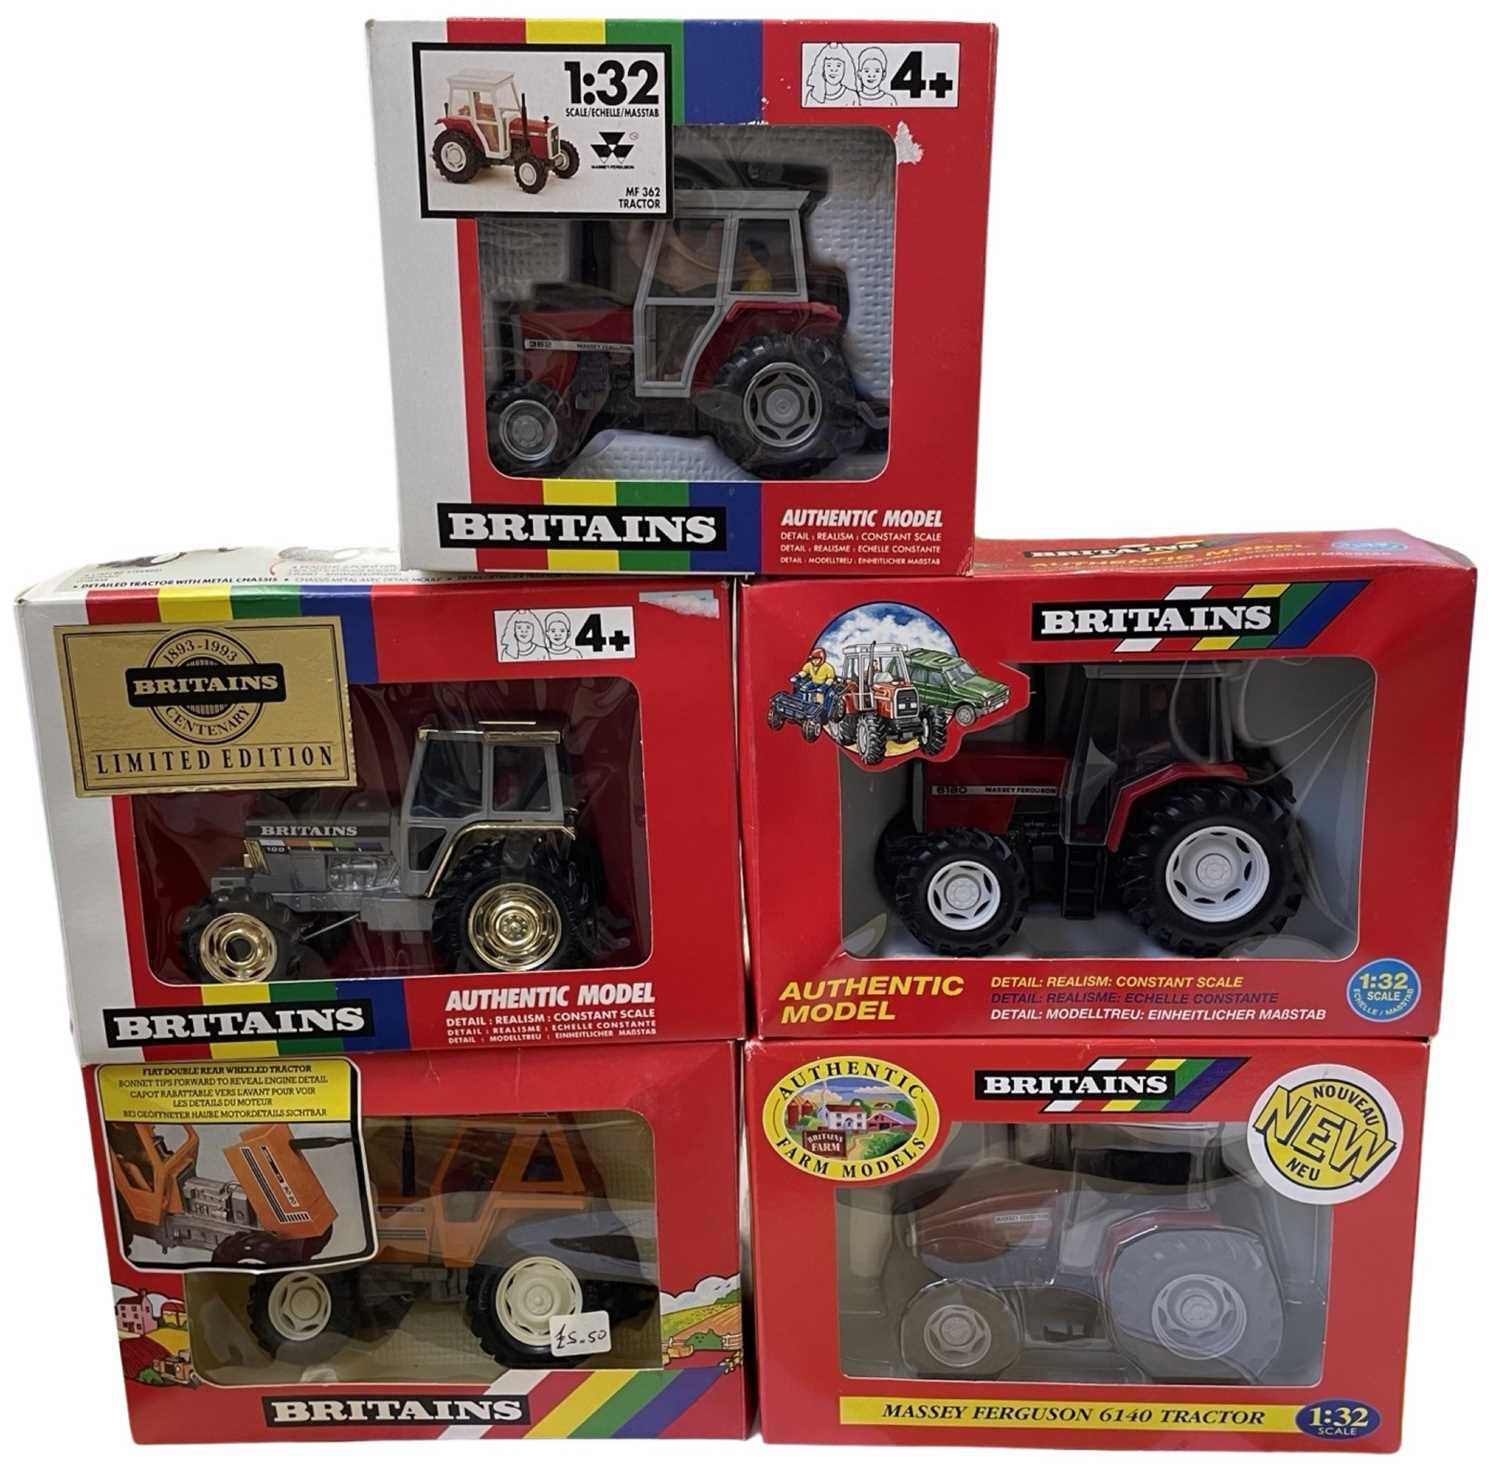 Five boxed Britains 1:32 scale model tractors, to include: - Massey Ferguson MF 362 - Limited